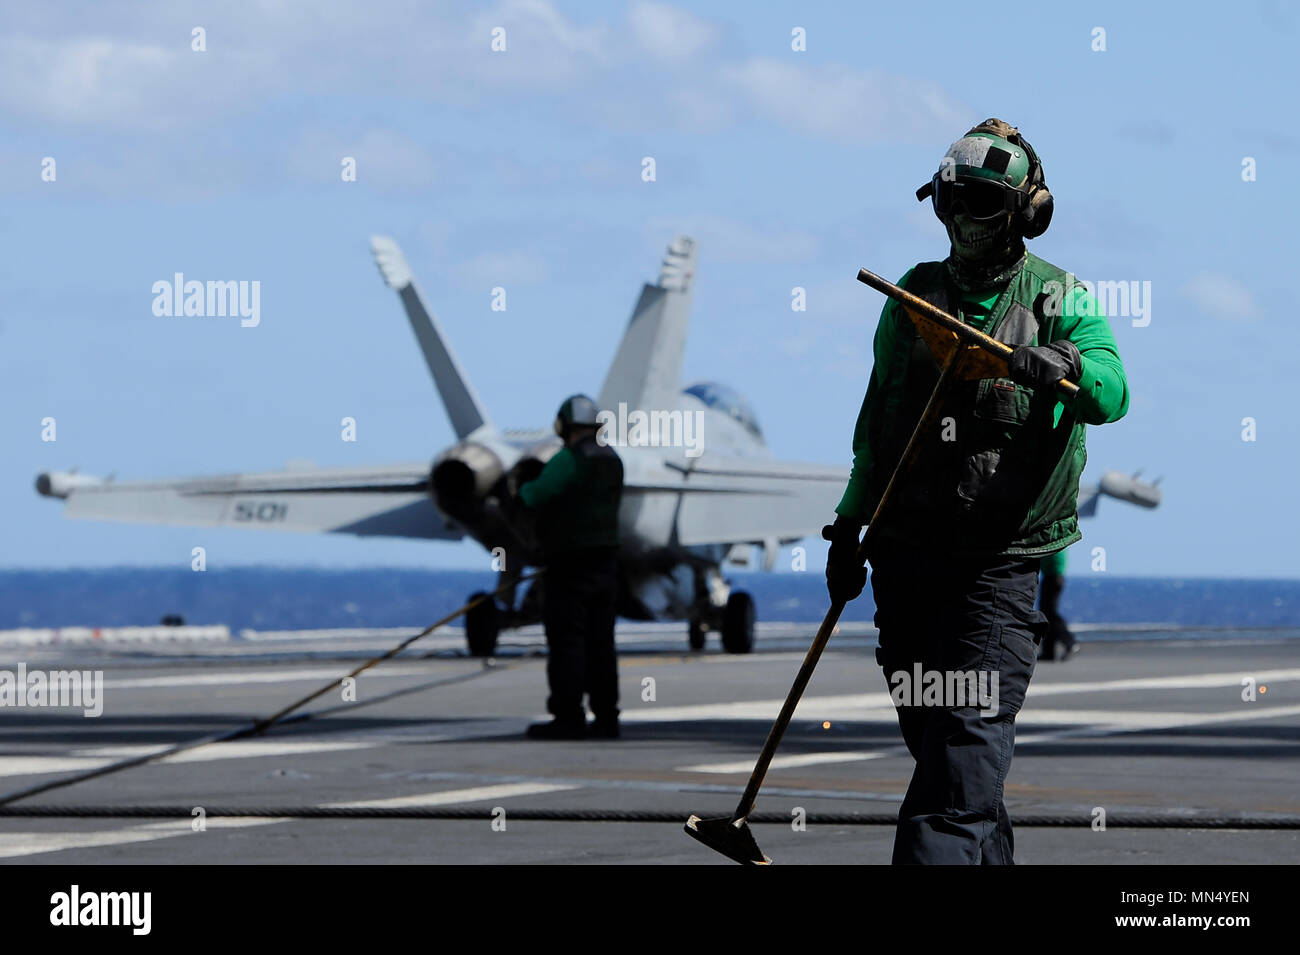 171020-N-PE636-019 ATLANTIC OCEAN (Oct. 20, 2017) Aviation Boatswain's Mate (Equipment) Airman Brandon Chapman participates in flight operations on the flight deck aboard USS Harry S. Truman (CVN 75). Truman is currently underway conducting Tailored Shipboard Test Availability and Final Evaluation Problem (TSTA/FEP) in preparation for future operations. (U.S. Navy photo by Mass Communication Specialist 2nd Class Anthony Flynn/Released) Stock Photo